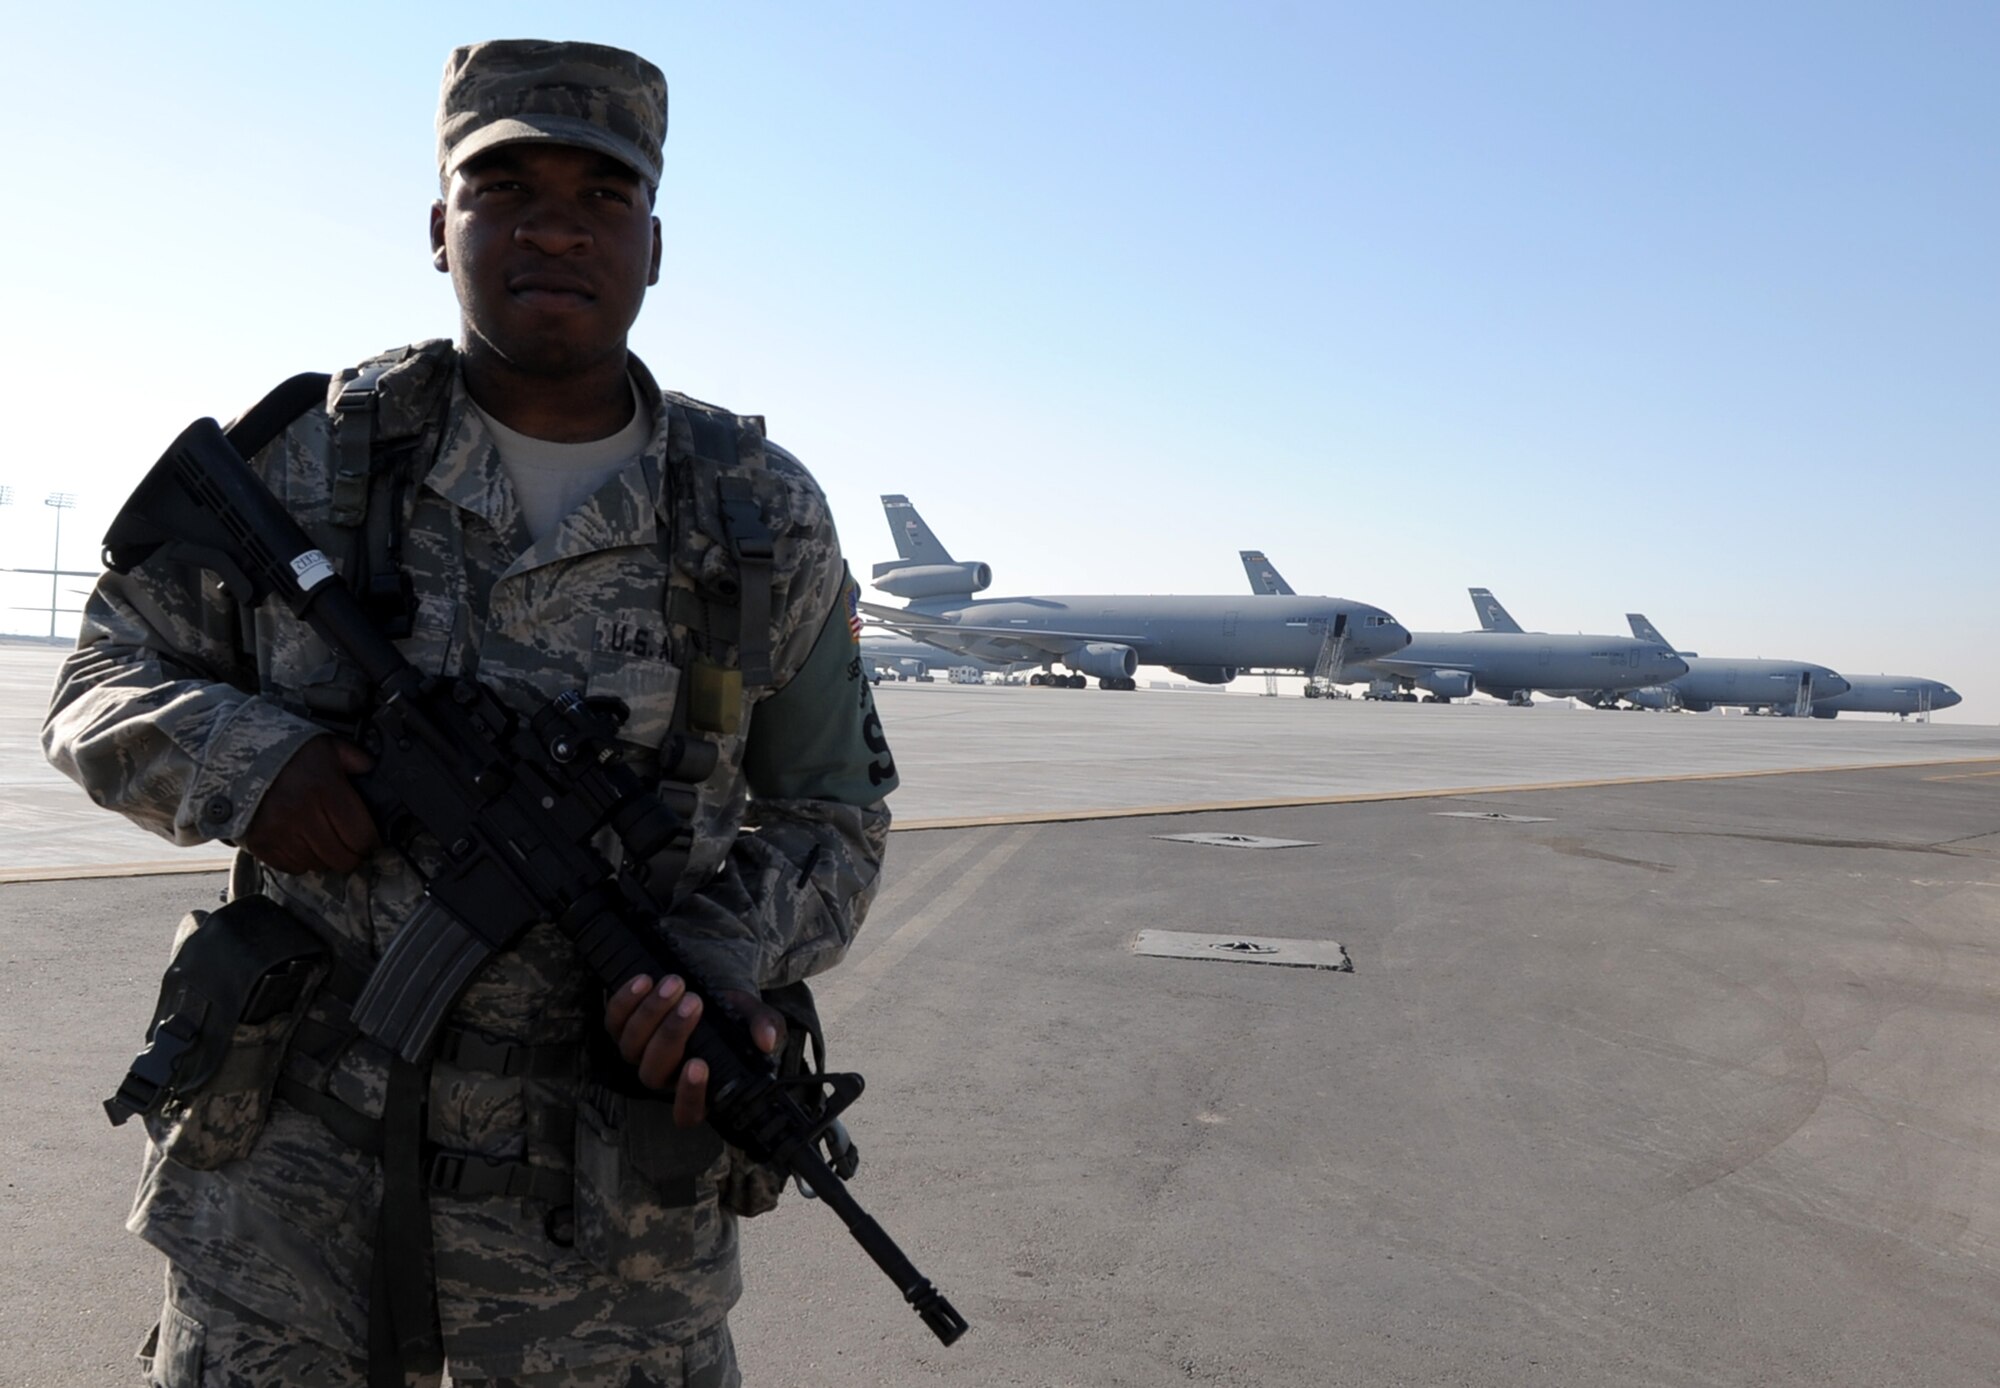 Airman 1st Class William Hollinger, 380th Expeditionary Security Forces Squadron, watches over the flightline at a non-disclosed base in Southwest Asia on Jan. 8, 2010.  The 380th ESFS and the 380th Air Expeditionary Wing support Operations Iraqi Freedom and Enduring Freedom and the Combined Joint Task Force-Horn of Africa. Airman Hollinger is deployed from the 21st Security Forces Squadron and his hometown is Norfolk, Va.  (U.S. Air Force Photo/Tech. Sgt. Scott T. Sturkol/Released)